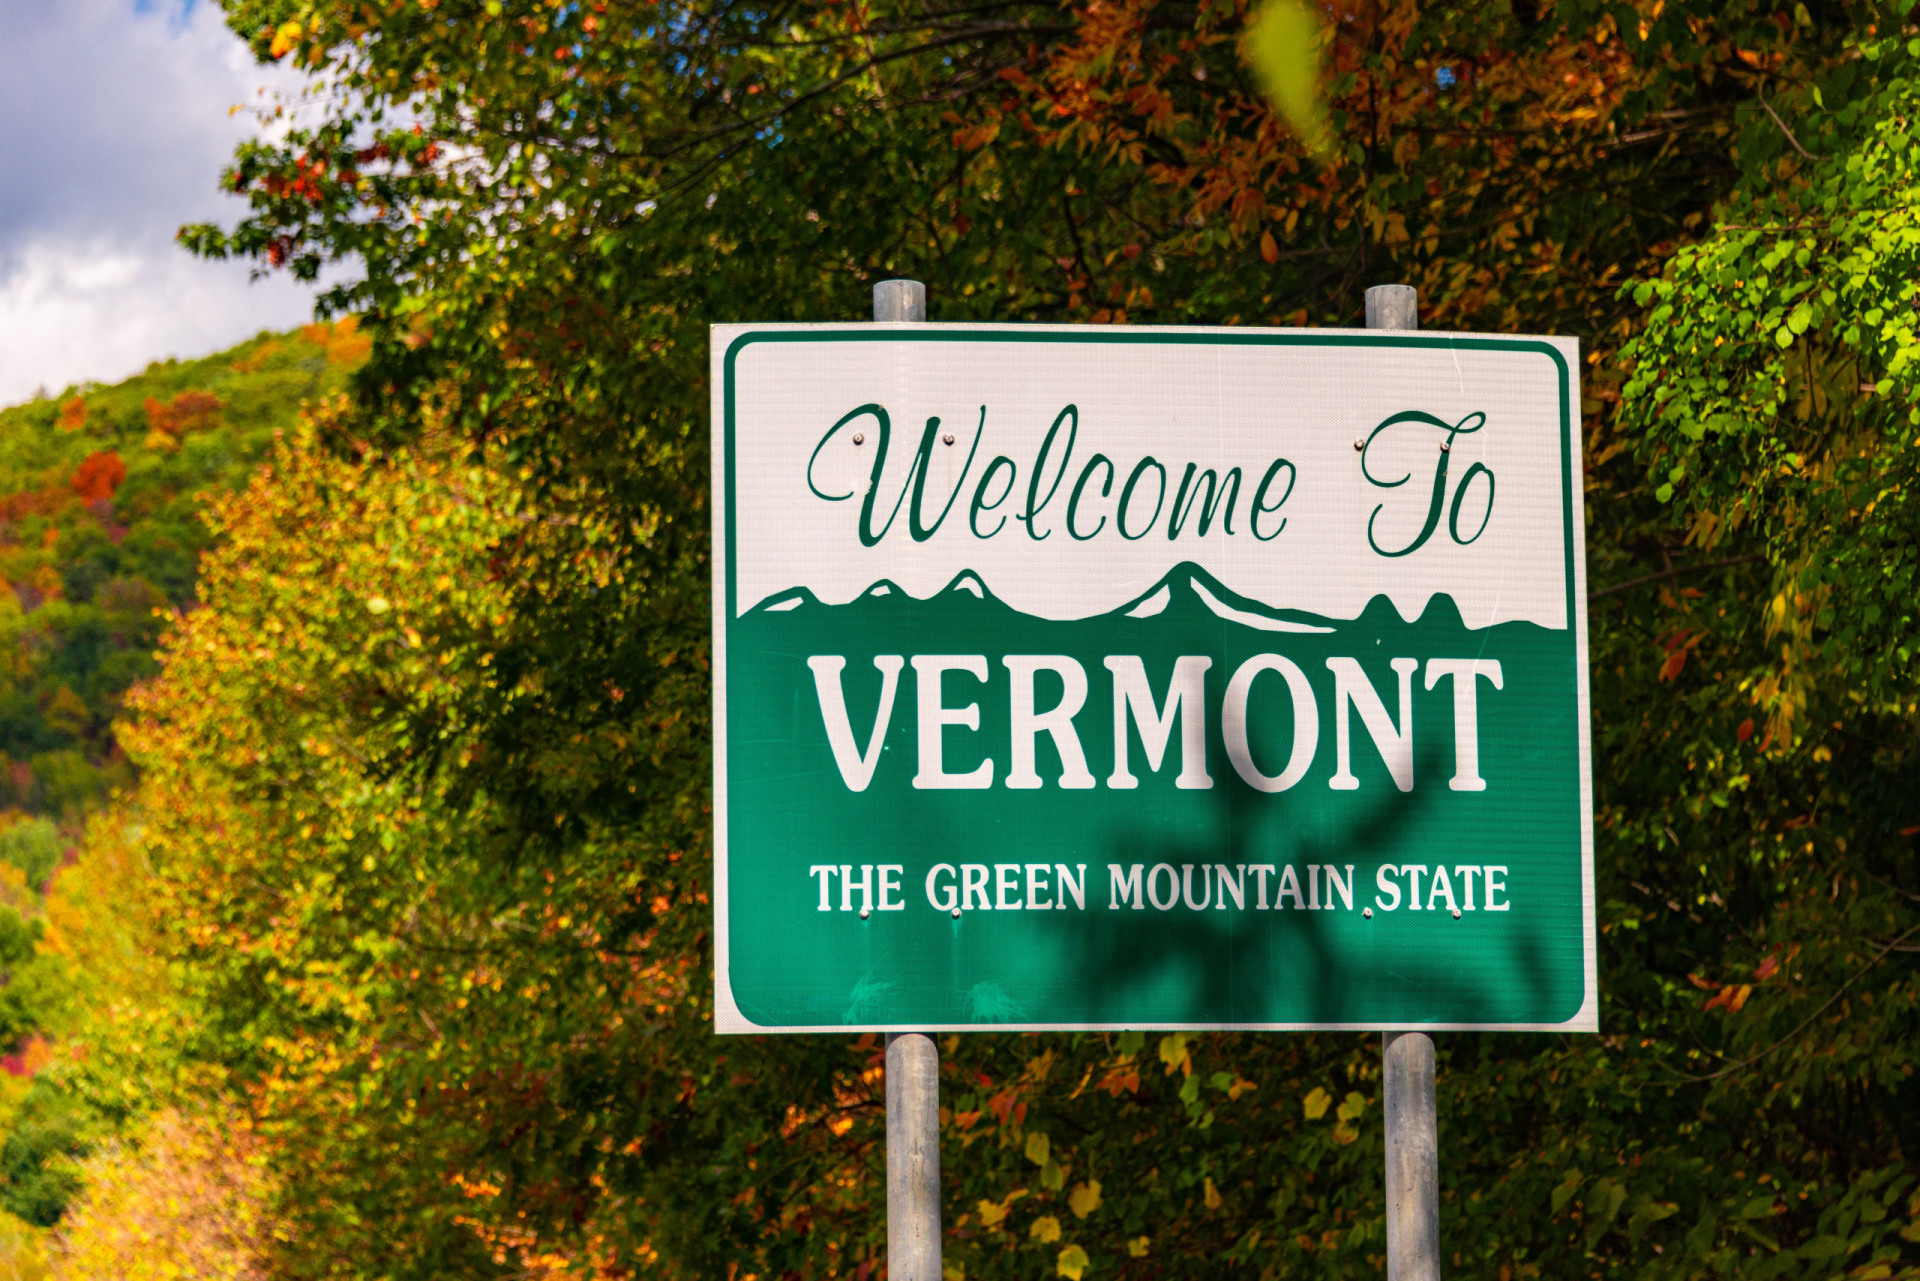 <p>Vermont's welcome sign is a good example of the image matching the slogan. Want to convey green mountains? You got it.</p><p><a href="https://www.msn.com/en-us/community/channel/vid-7xx8mnucu55yw63we9va2gwr7uihbxwc68fxqp25x6tg4ftibpra?cvid=94631541bc0f4f89bfd59158d696ad7e">Follow us and access great exclusive content every day</a></p>